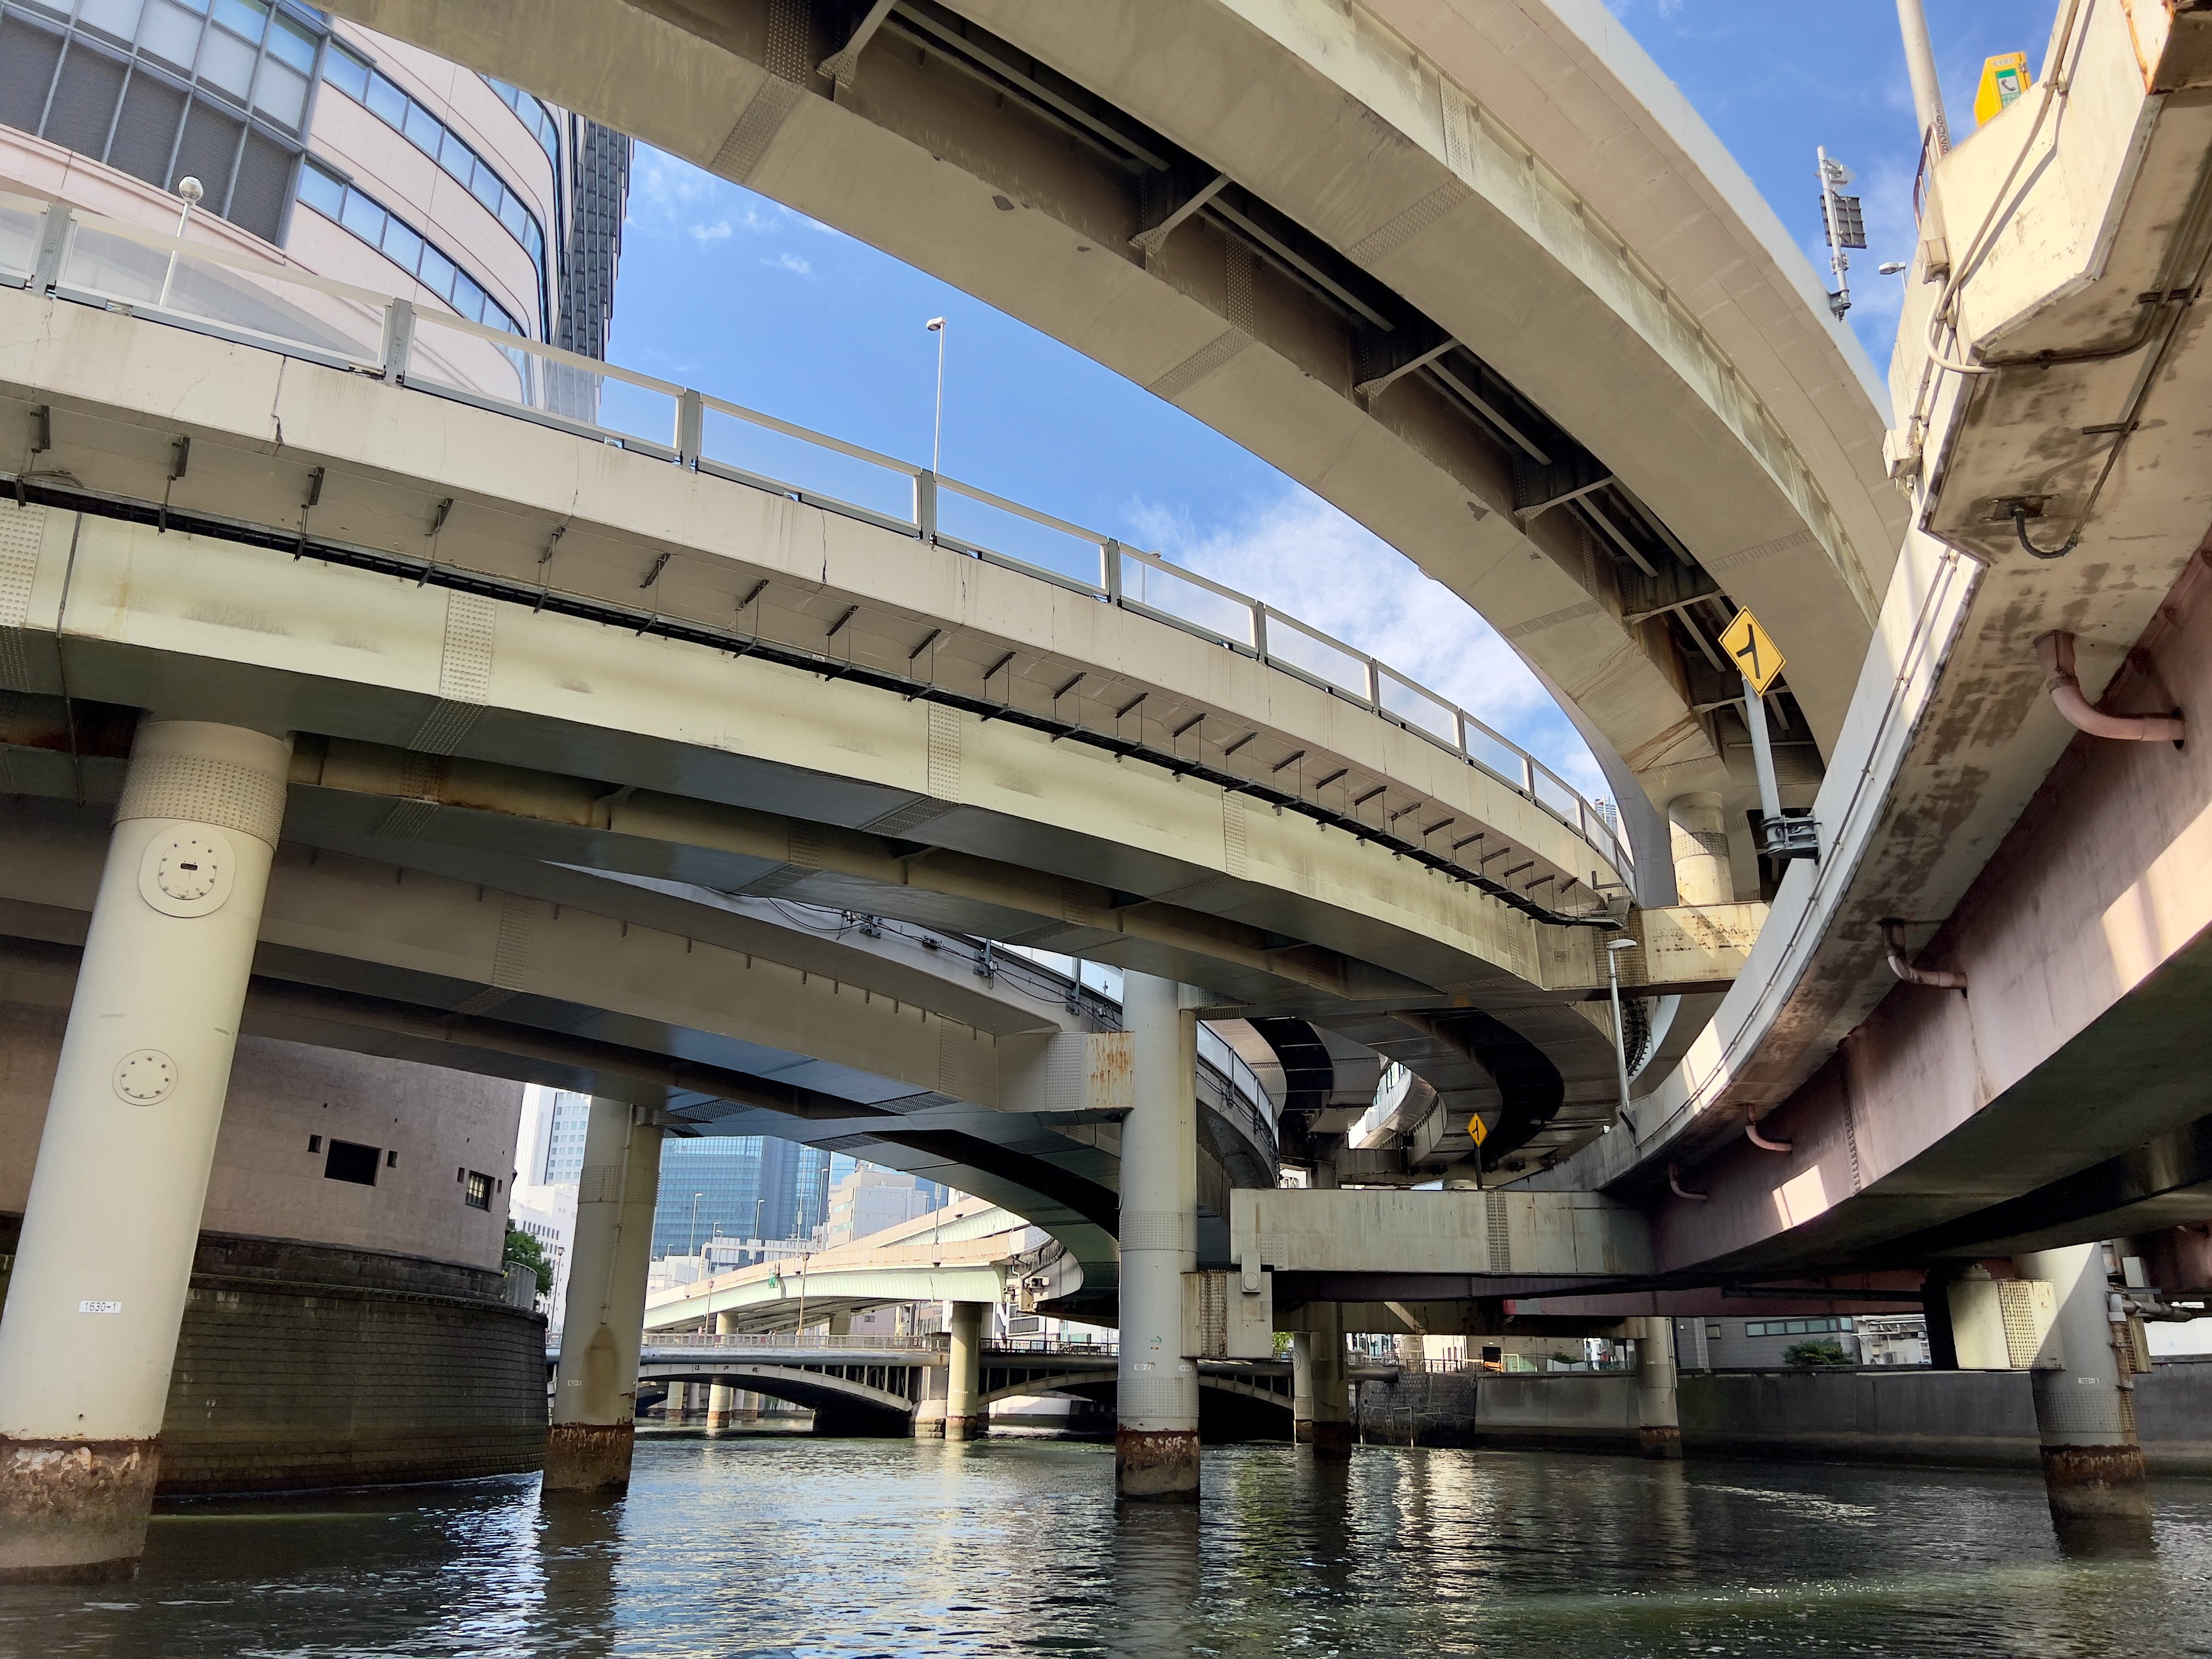 A cruise on the Nihonbashi River in Tokyo shows the extent of highway construction in the 1960s - engineers chose to run expressways above rivers because it was easy to do. Photo: Peter Neville-Hadley